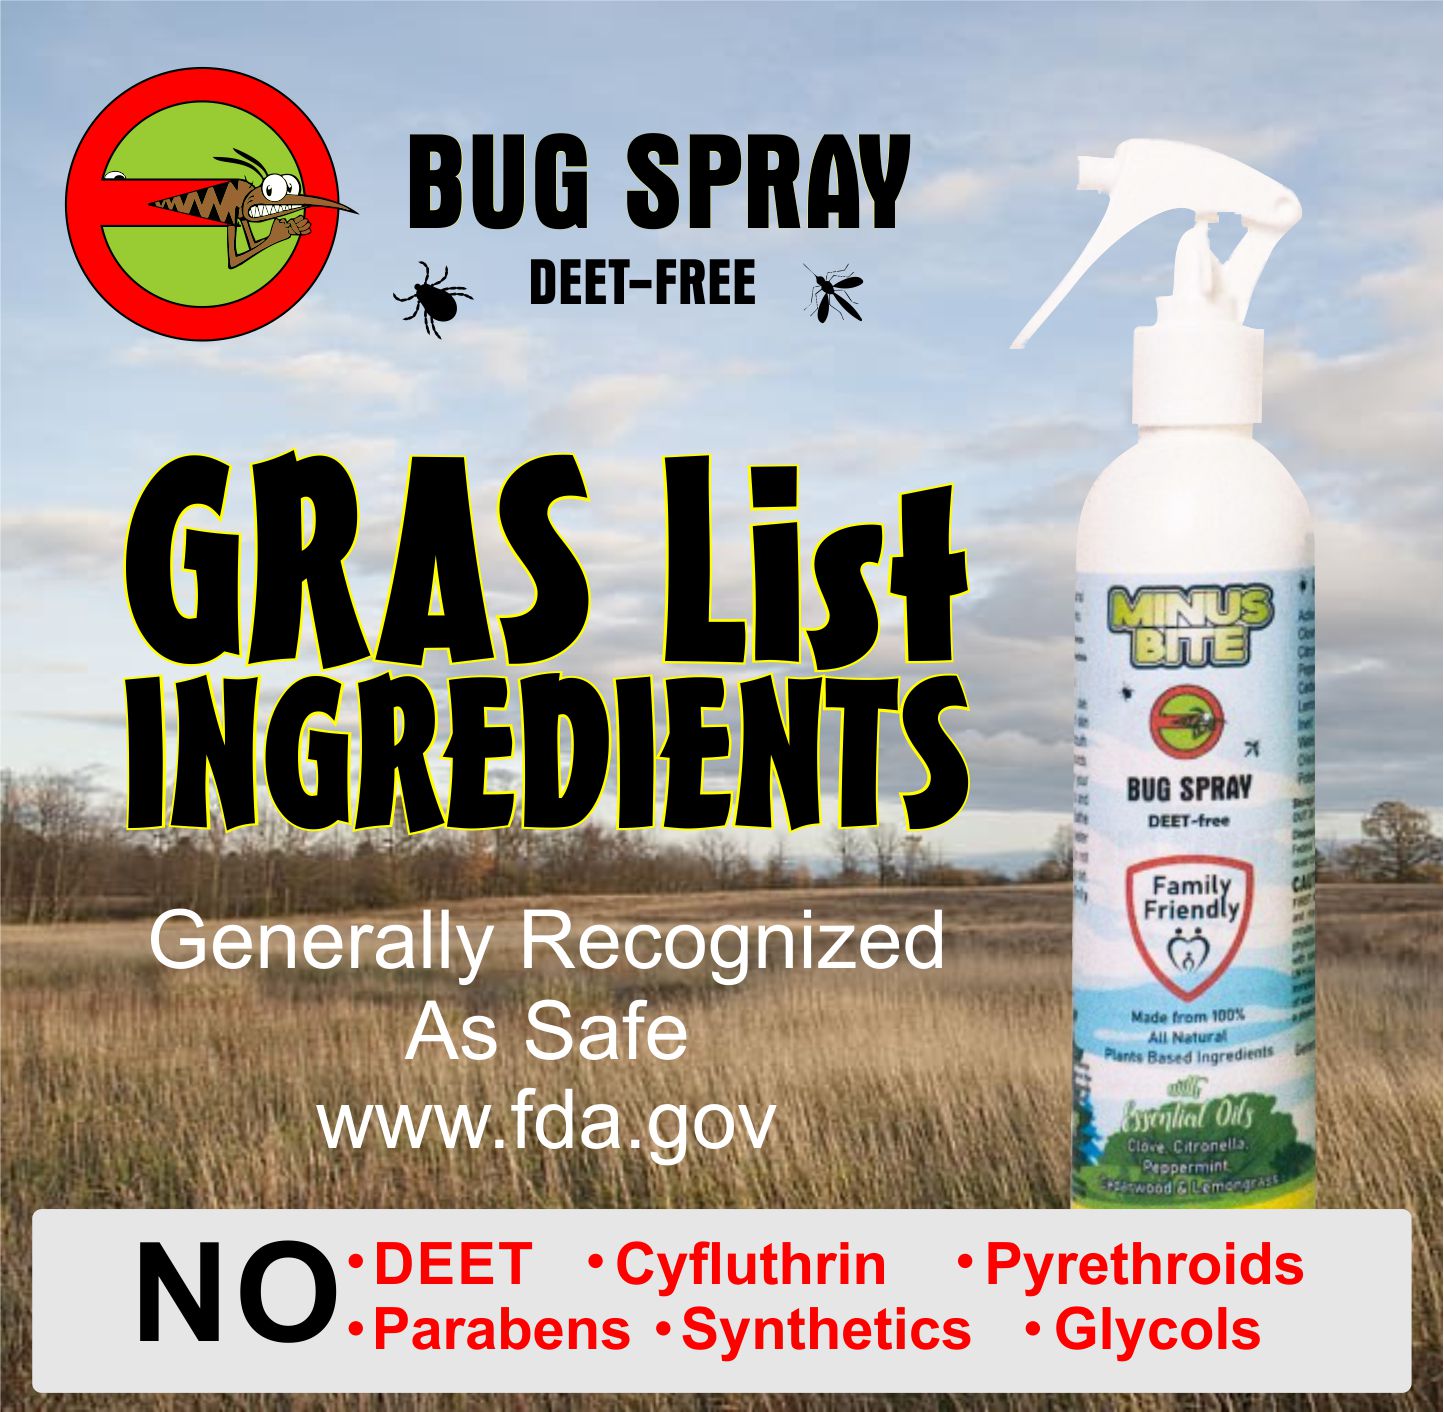 A hay field with a blue sky and a bottle of Minus Bite All Natural Bug Spray sitting on the grass. Minus Bite Bug Spray is DEET-FREE with GRAS List ingredients meaning Generally recognizes as safe.